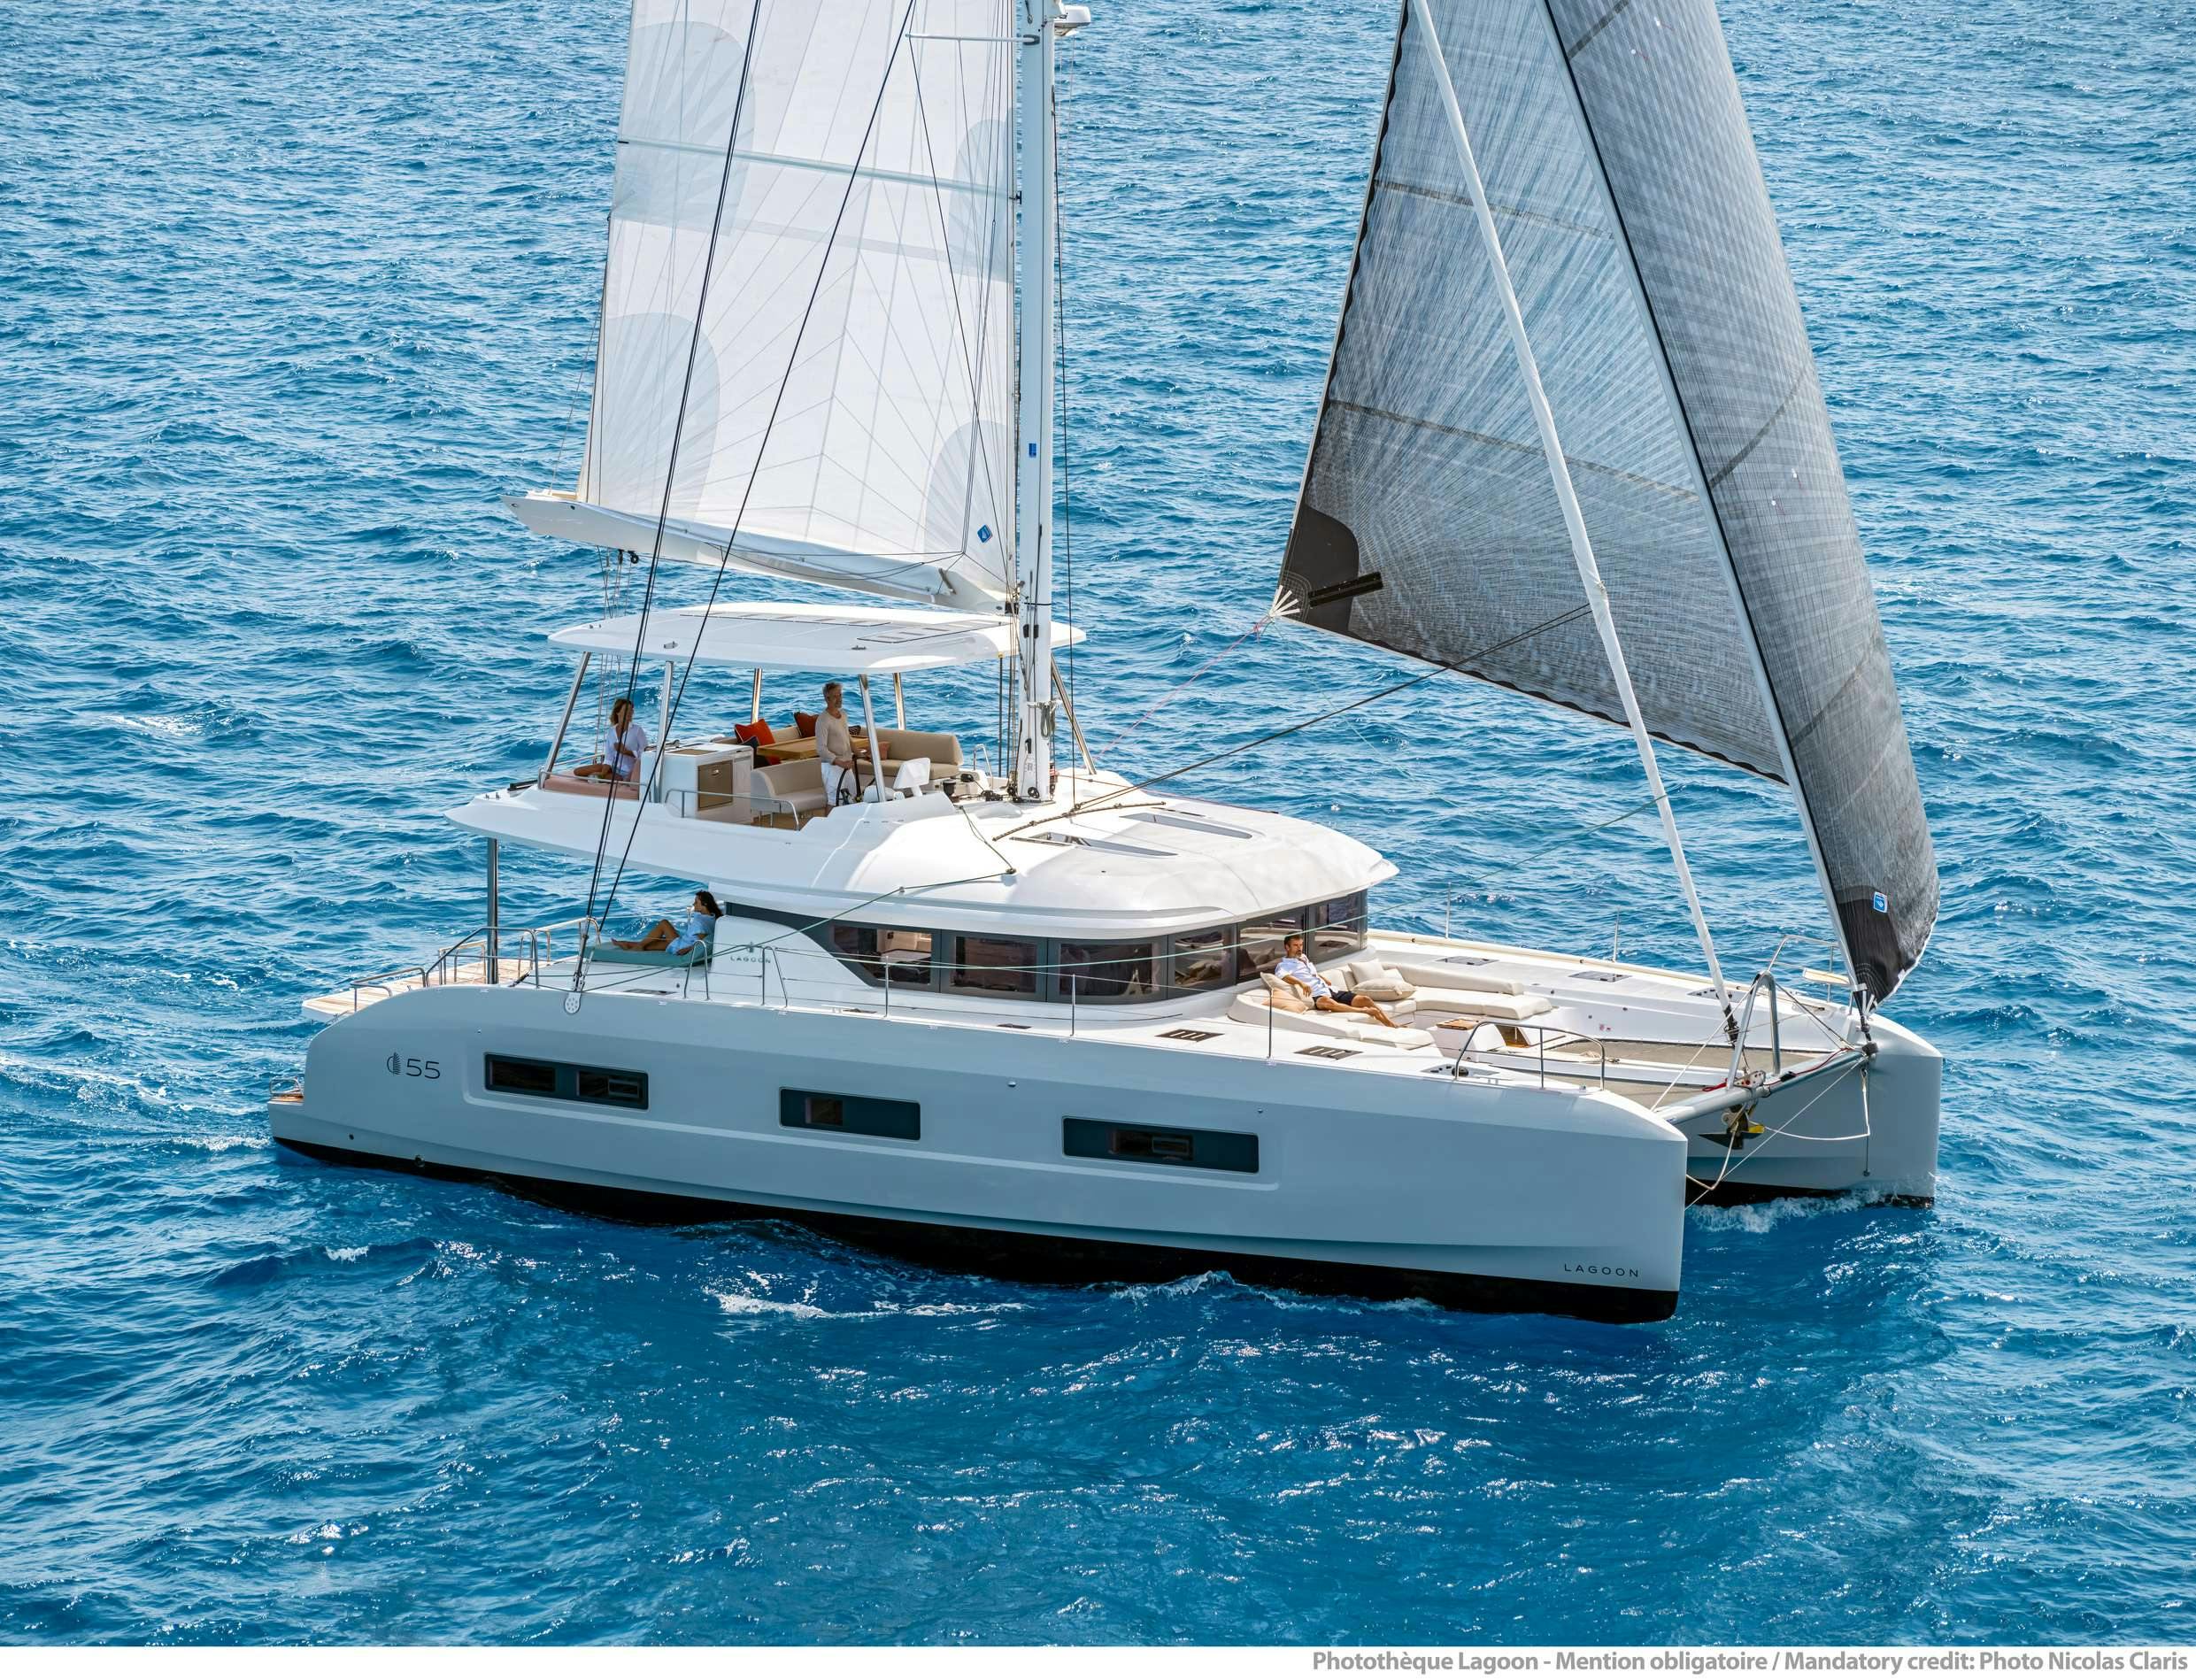 VALIUM 55 - Alimos Yacht Charter & Boat hire in Greece 1